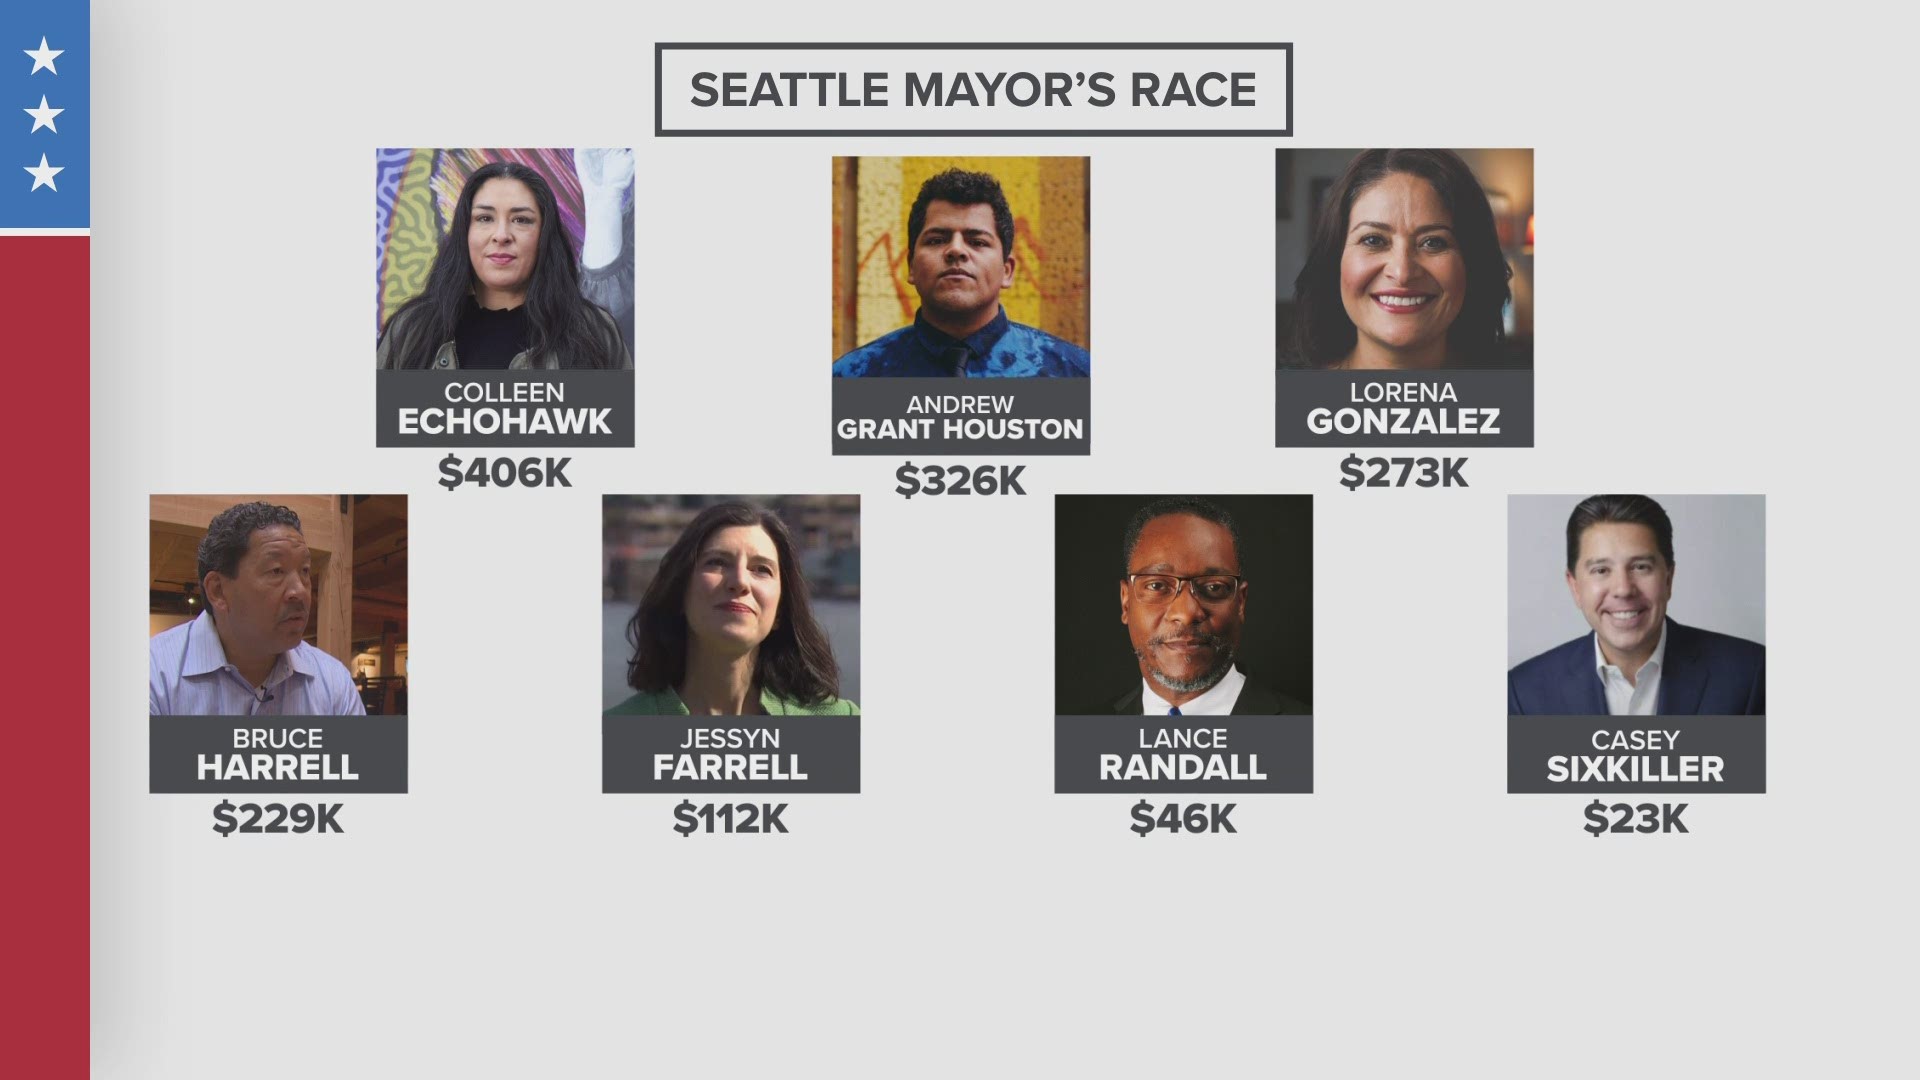 The primary election is set for August 3, 2021. A wide range of candidates are vying to replace Seattle Mayor Jenny Durkan.